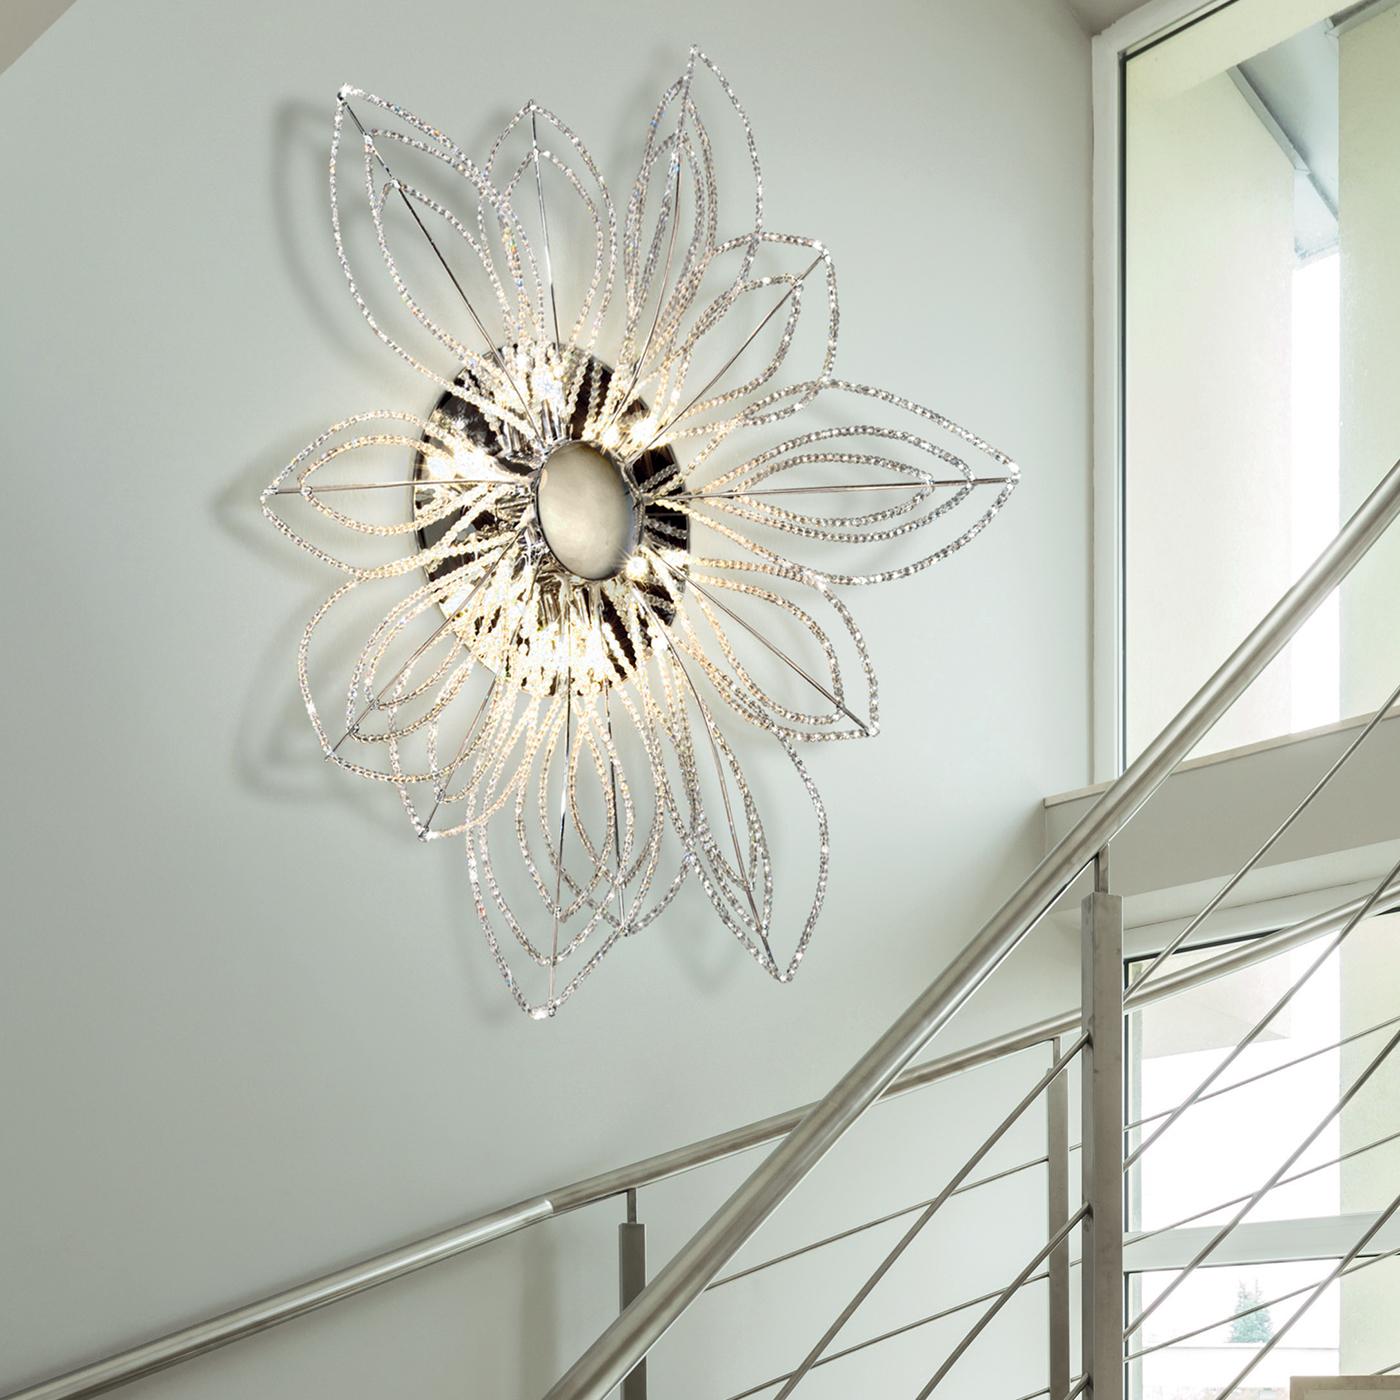 Crafted in transparent crystal with the main structure in a chrome or gold finish, this beautiful ceiling lamp features an elaborate and perfectly charming design. In the form of a flower and holding 12 lamps, the lighting fixture offers an element